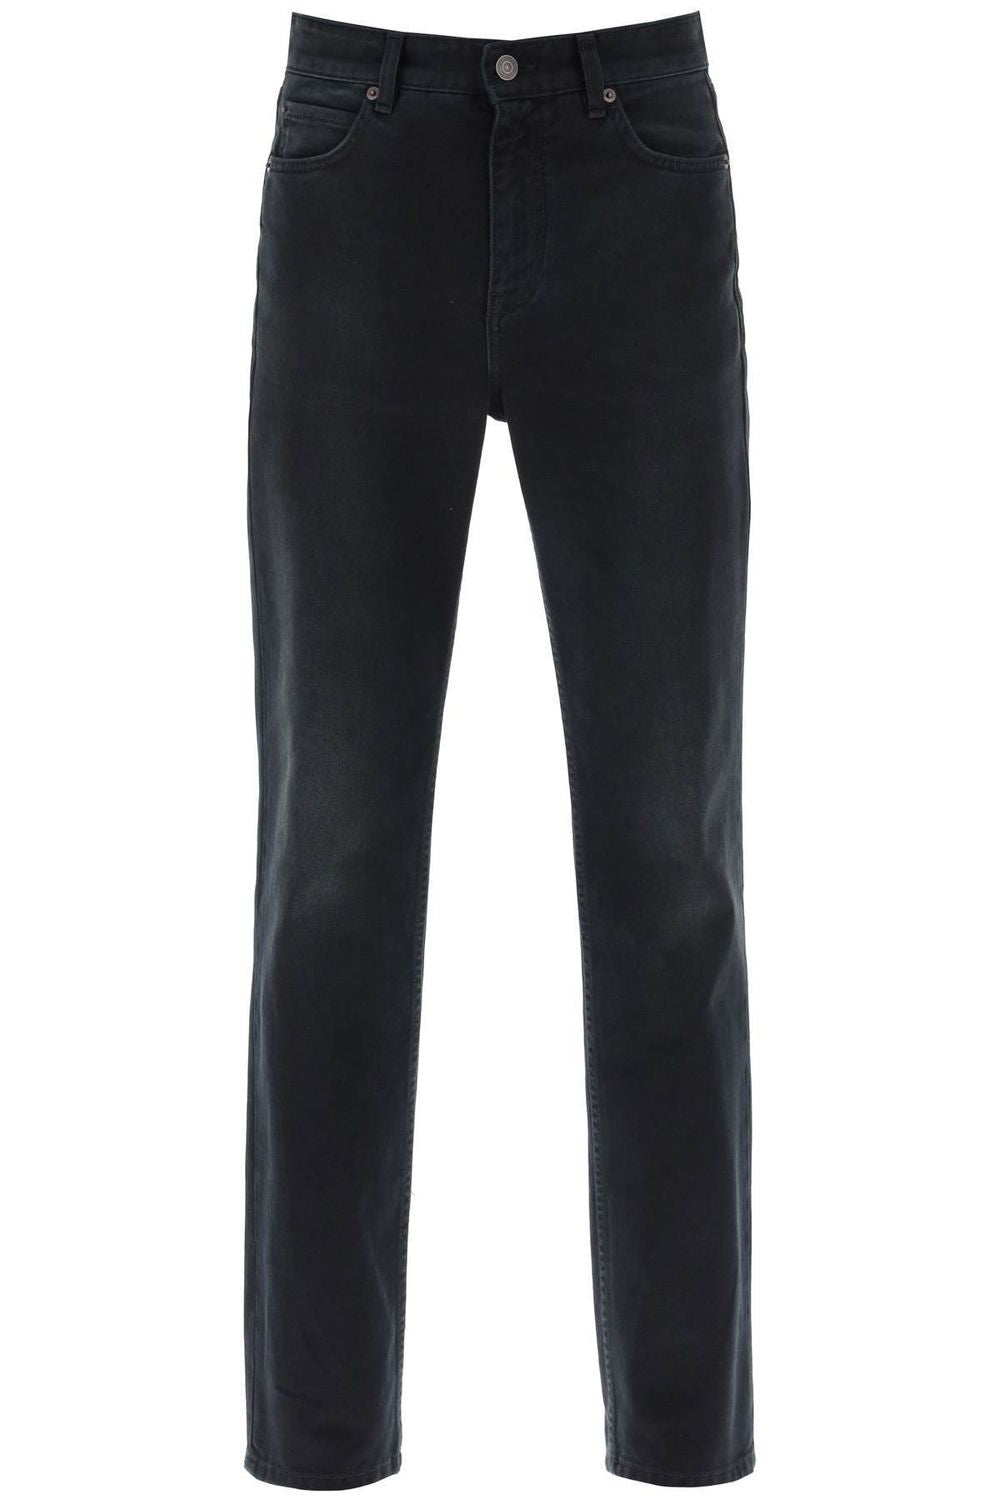 Slim Fit Mid-Waisted Canvas Trousers in Sunbleach for Men